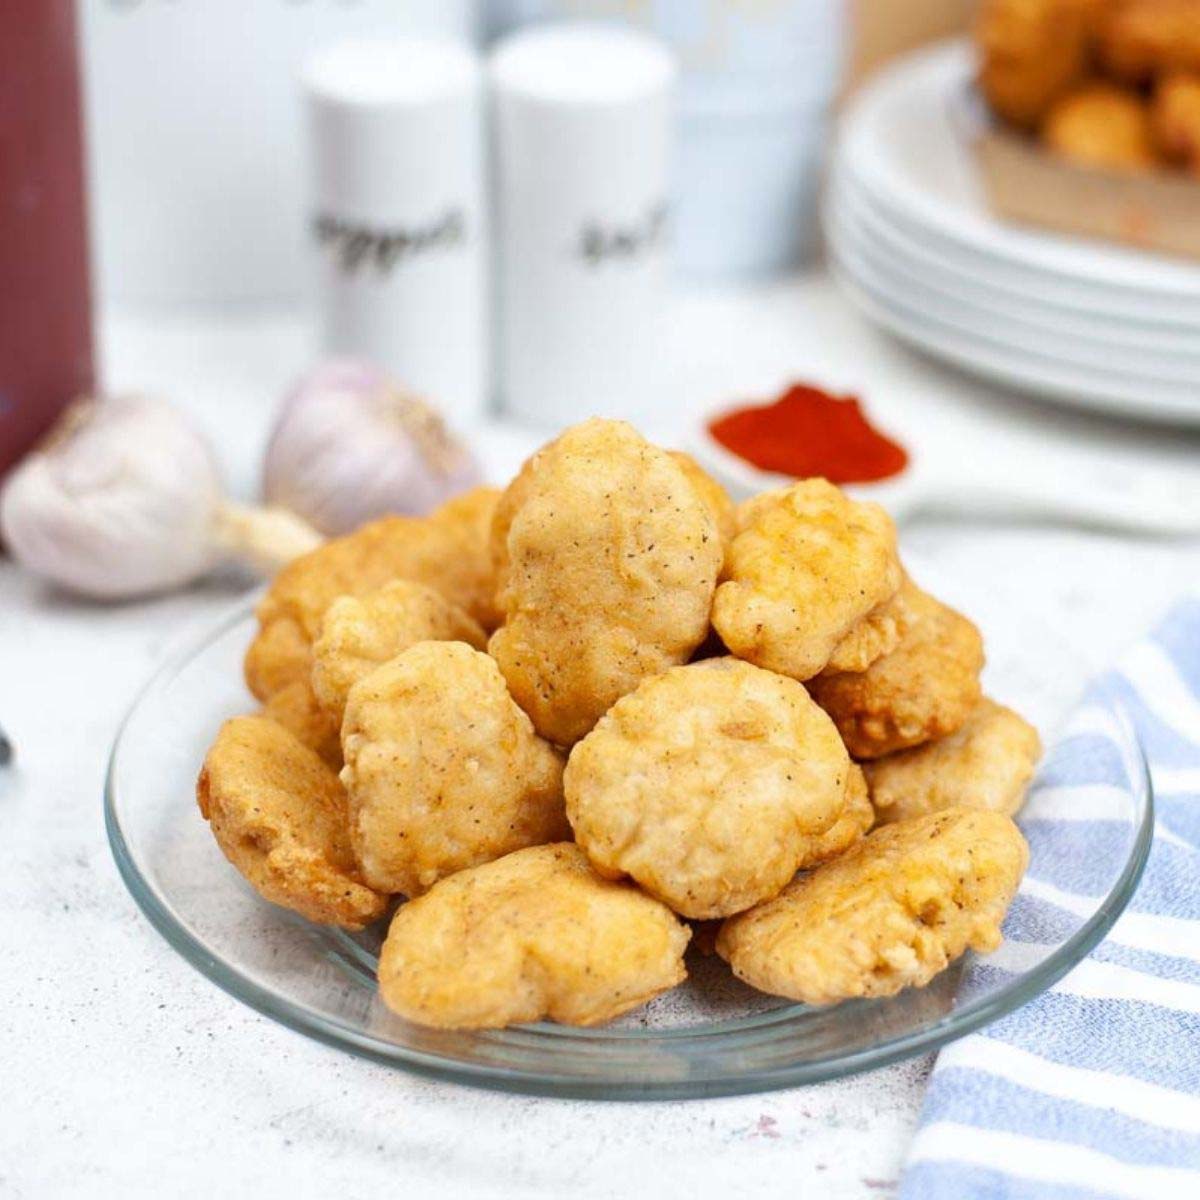 Thumbnail of air fryer chicken nuggets.